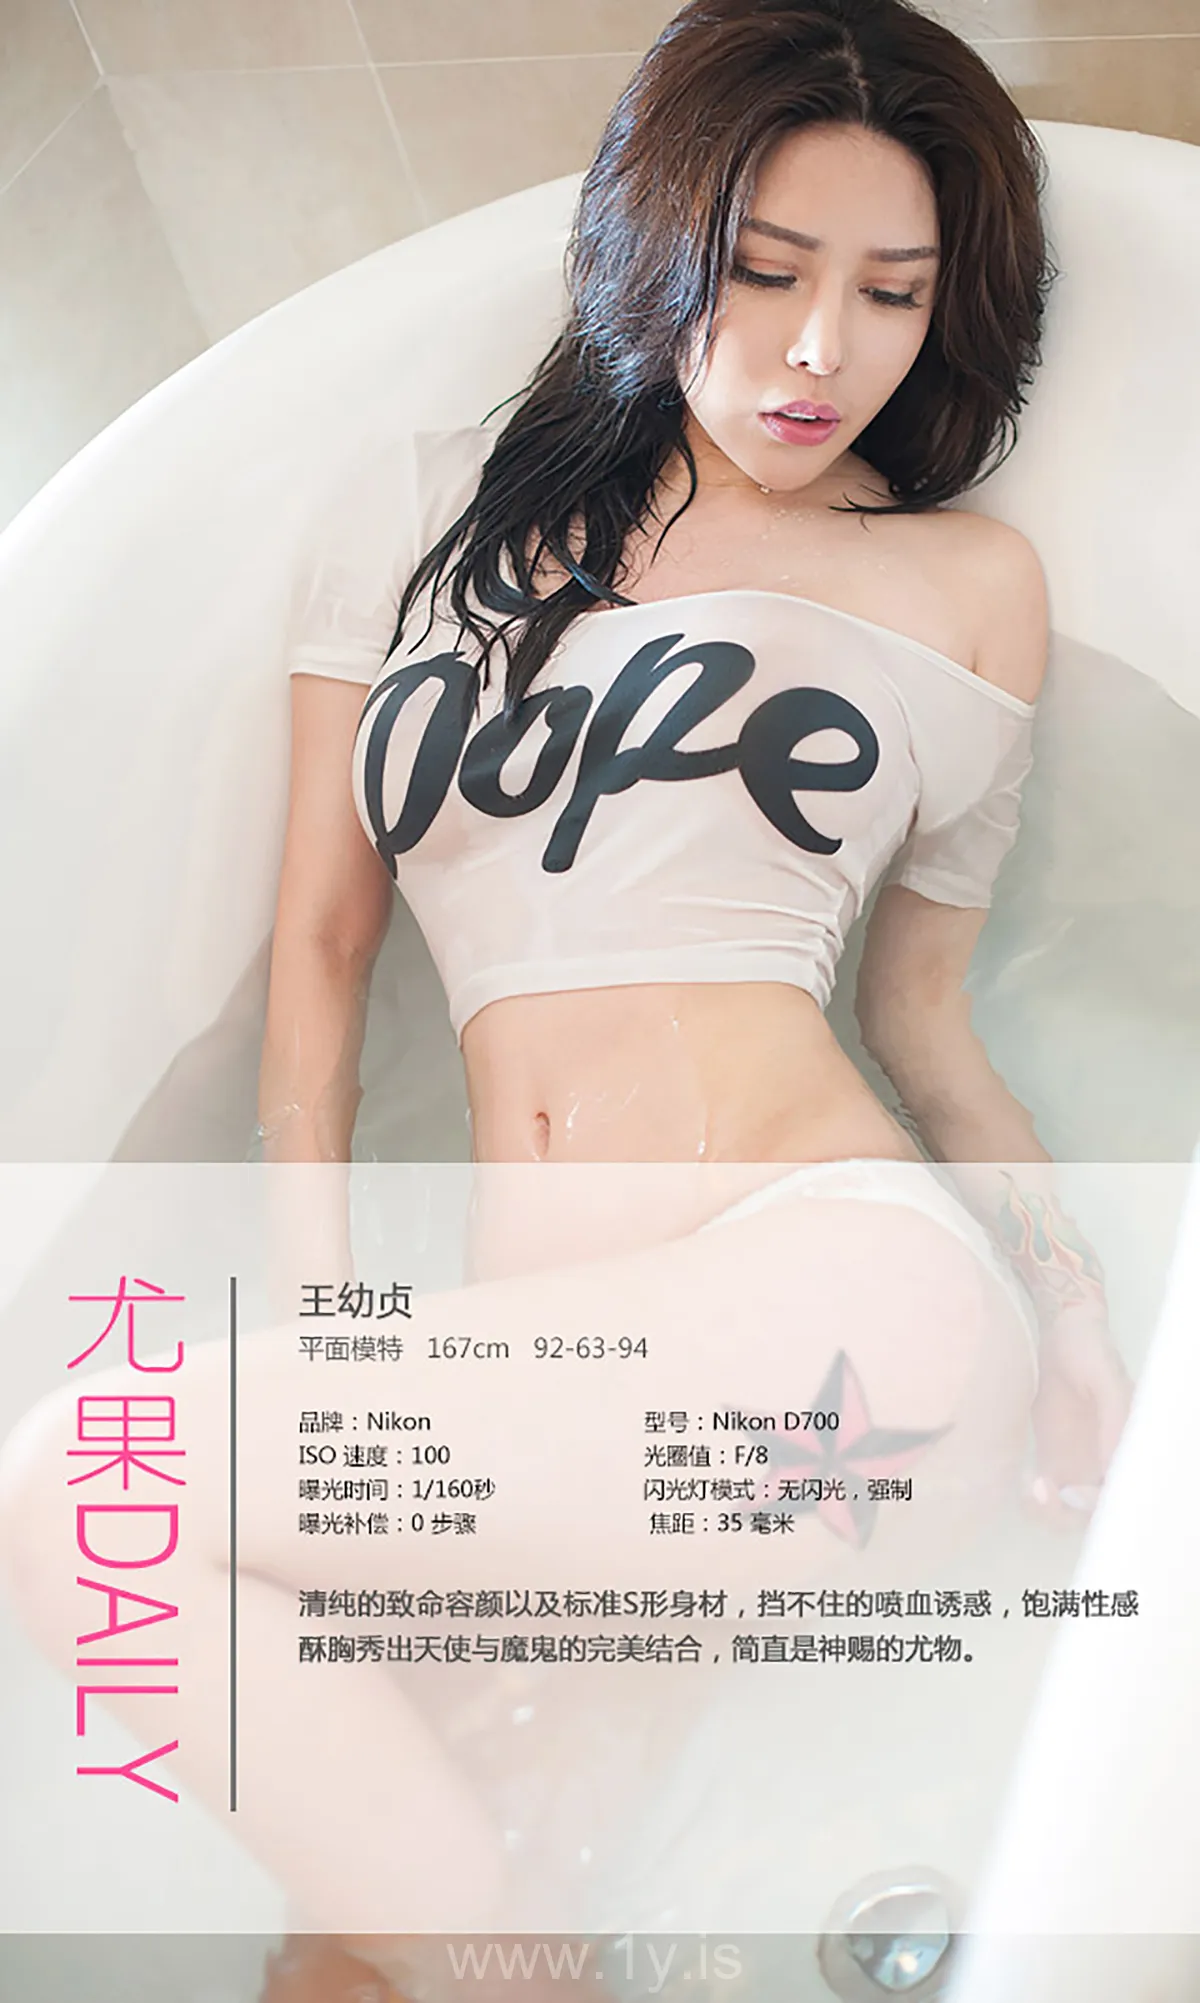 UGIRLS NO.226 Nice-looking & Adorable Chinese Chick 王幼贞